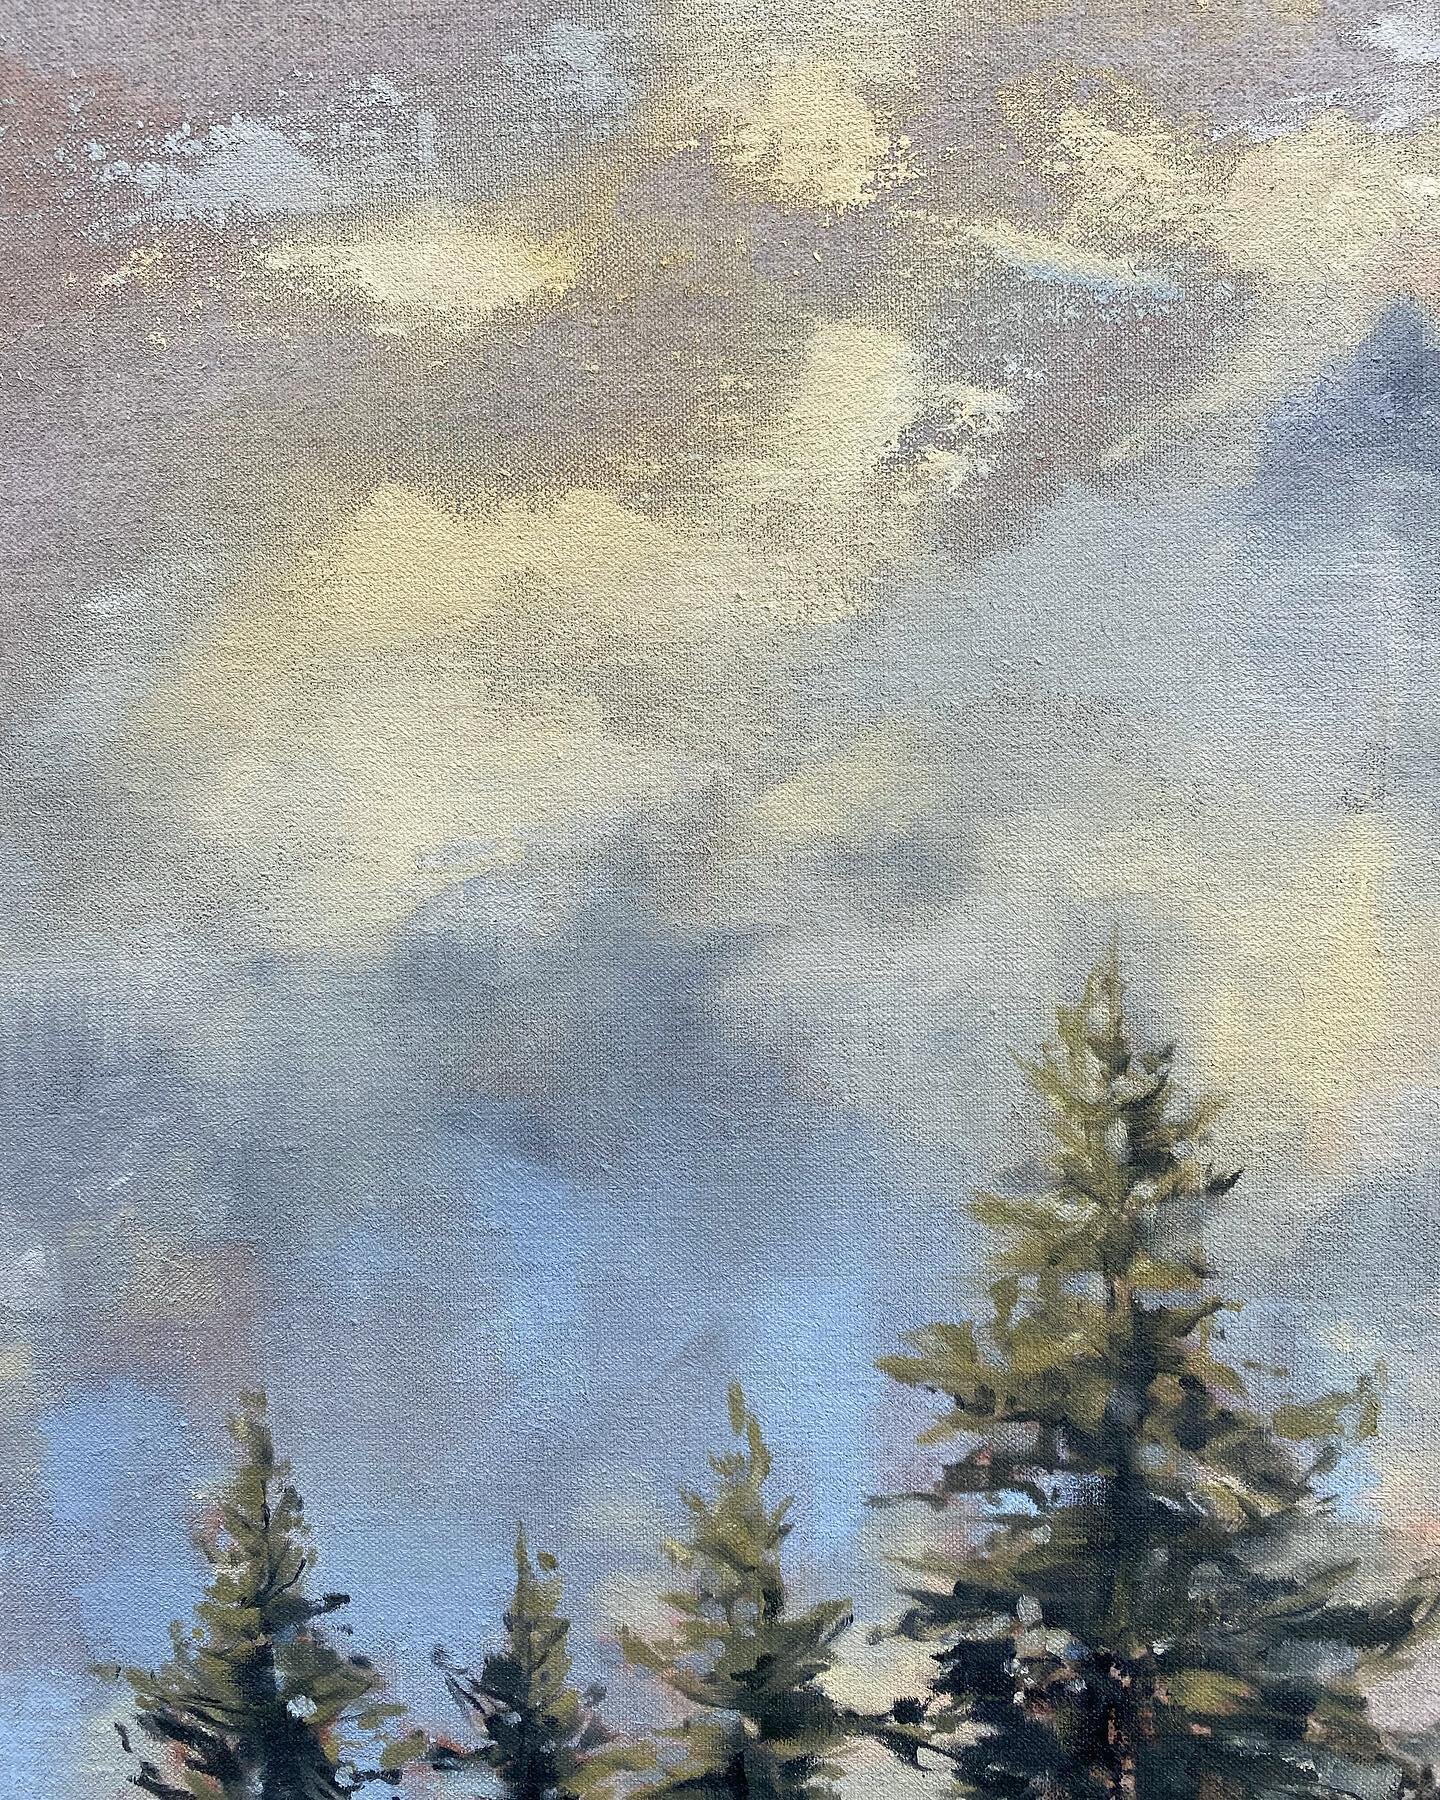 ✨Quick study on some new linen with clear gesso (base coat) Lately I&rsquo;ve been thinking a lot about when to stop during a painting. There are certain textures that come from watered down paint or the palate knife that I love, but they need to be 